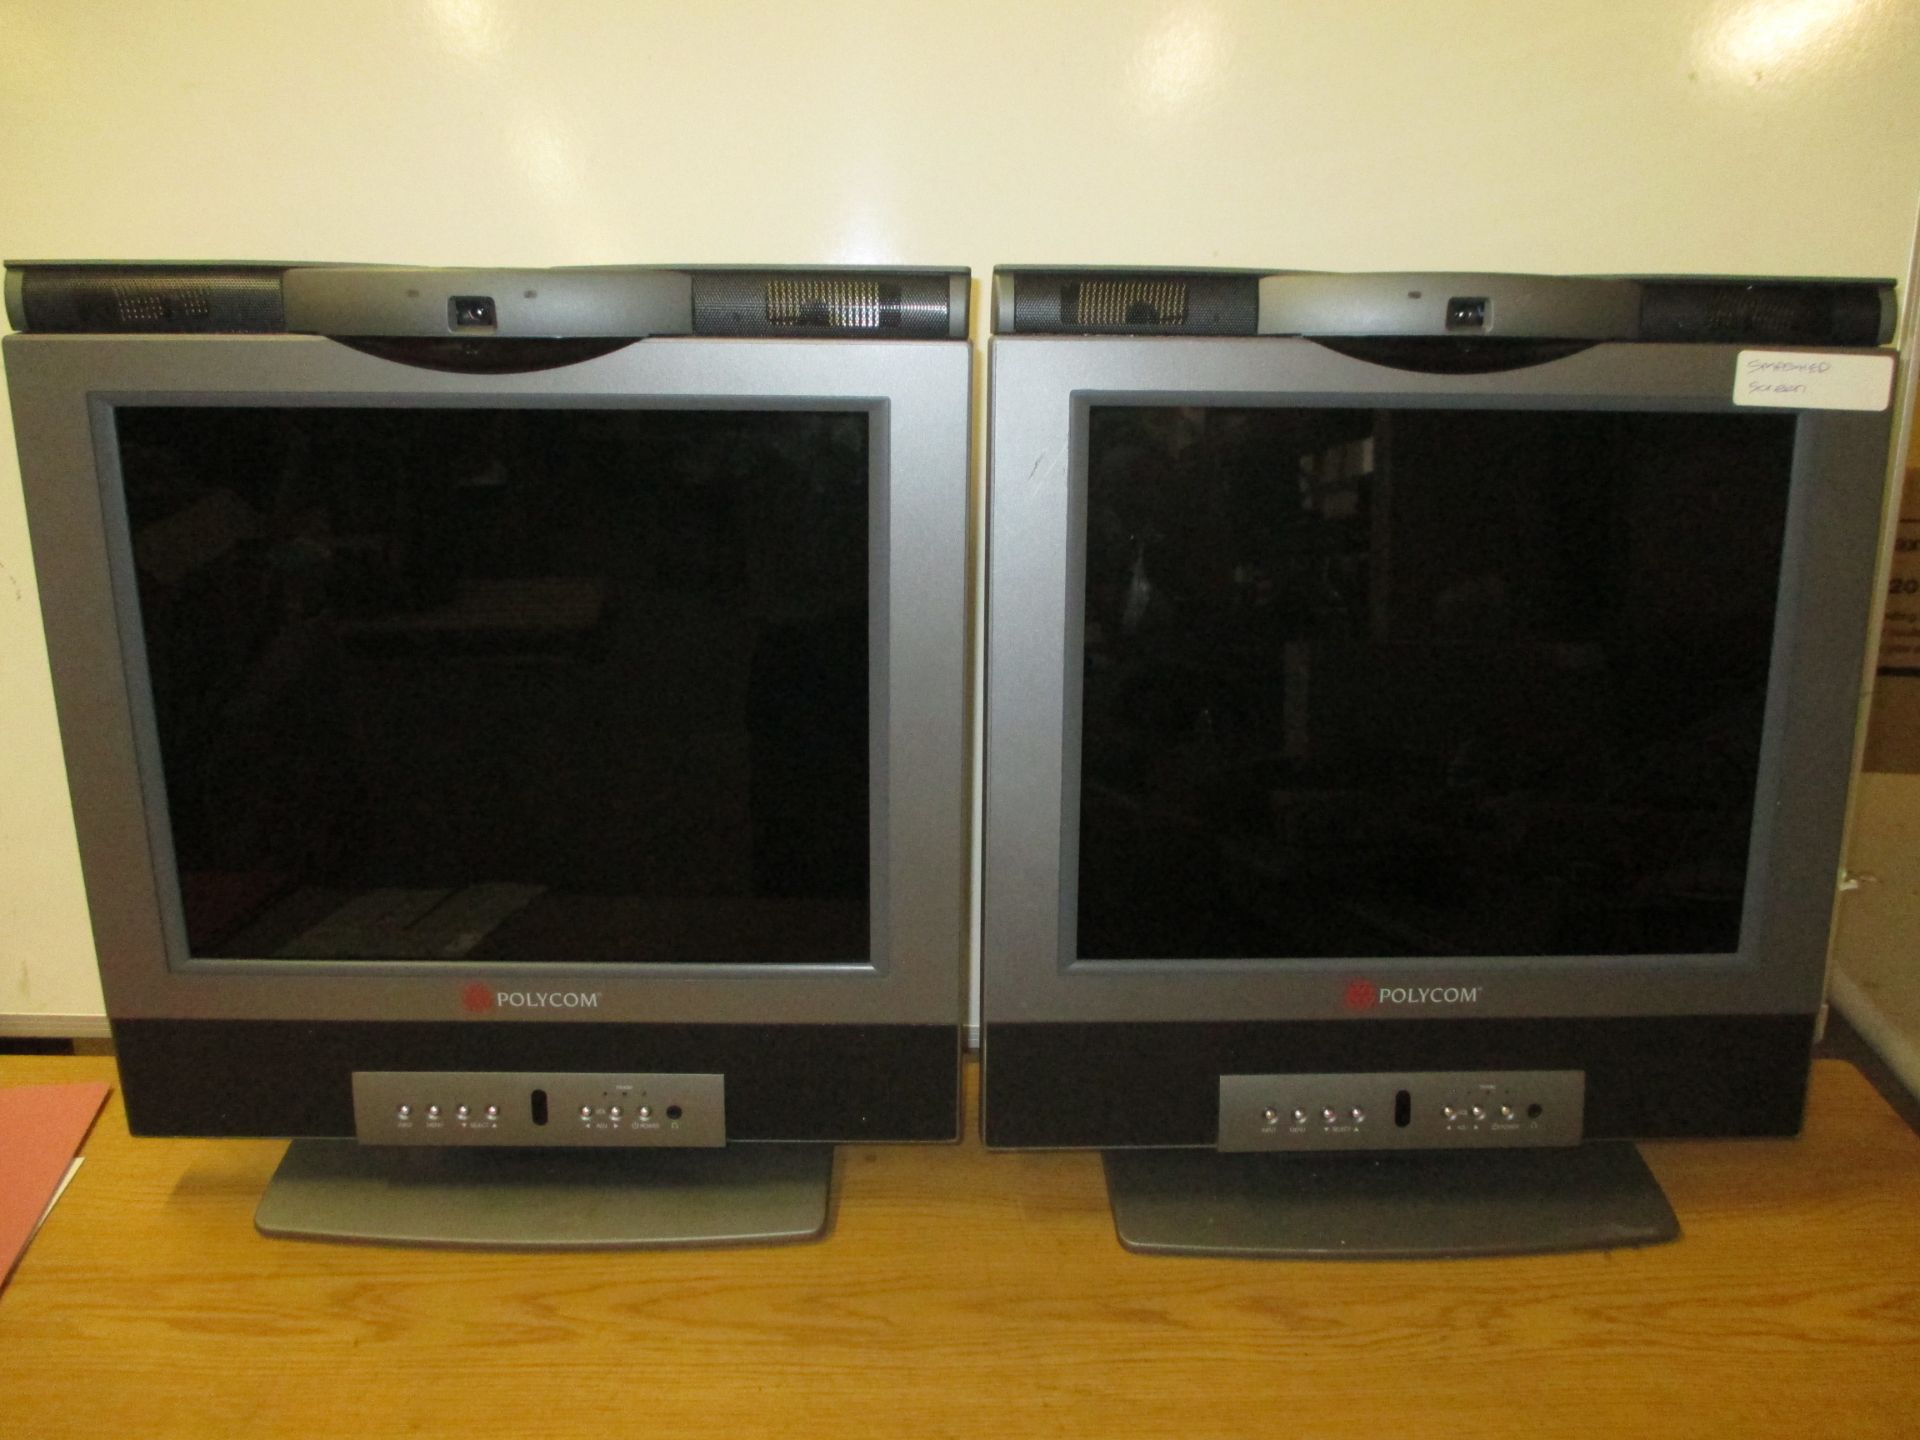 2 X POLYCOM VSX 3000 IP Video Conferencing System . (One has smashed screen but useful for parts)